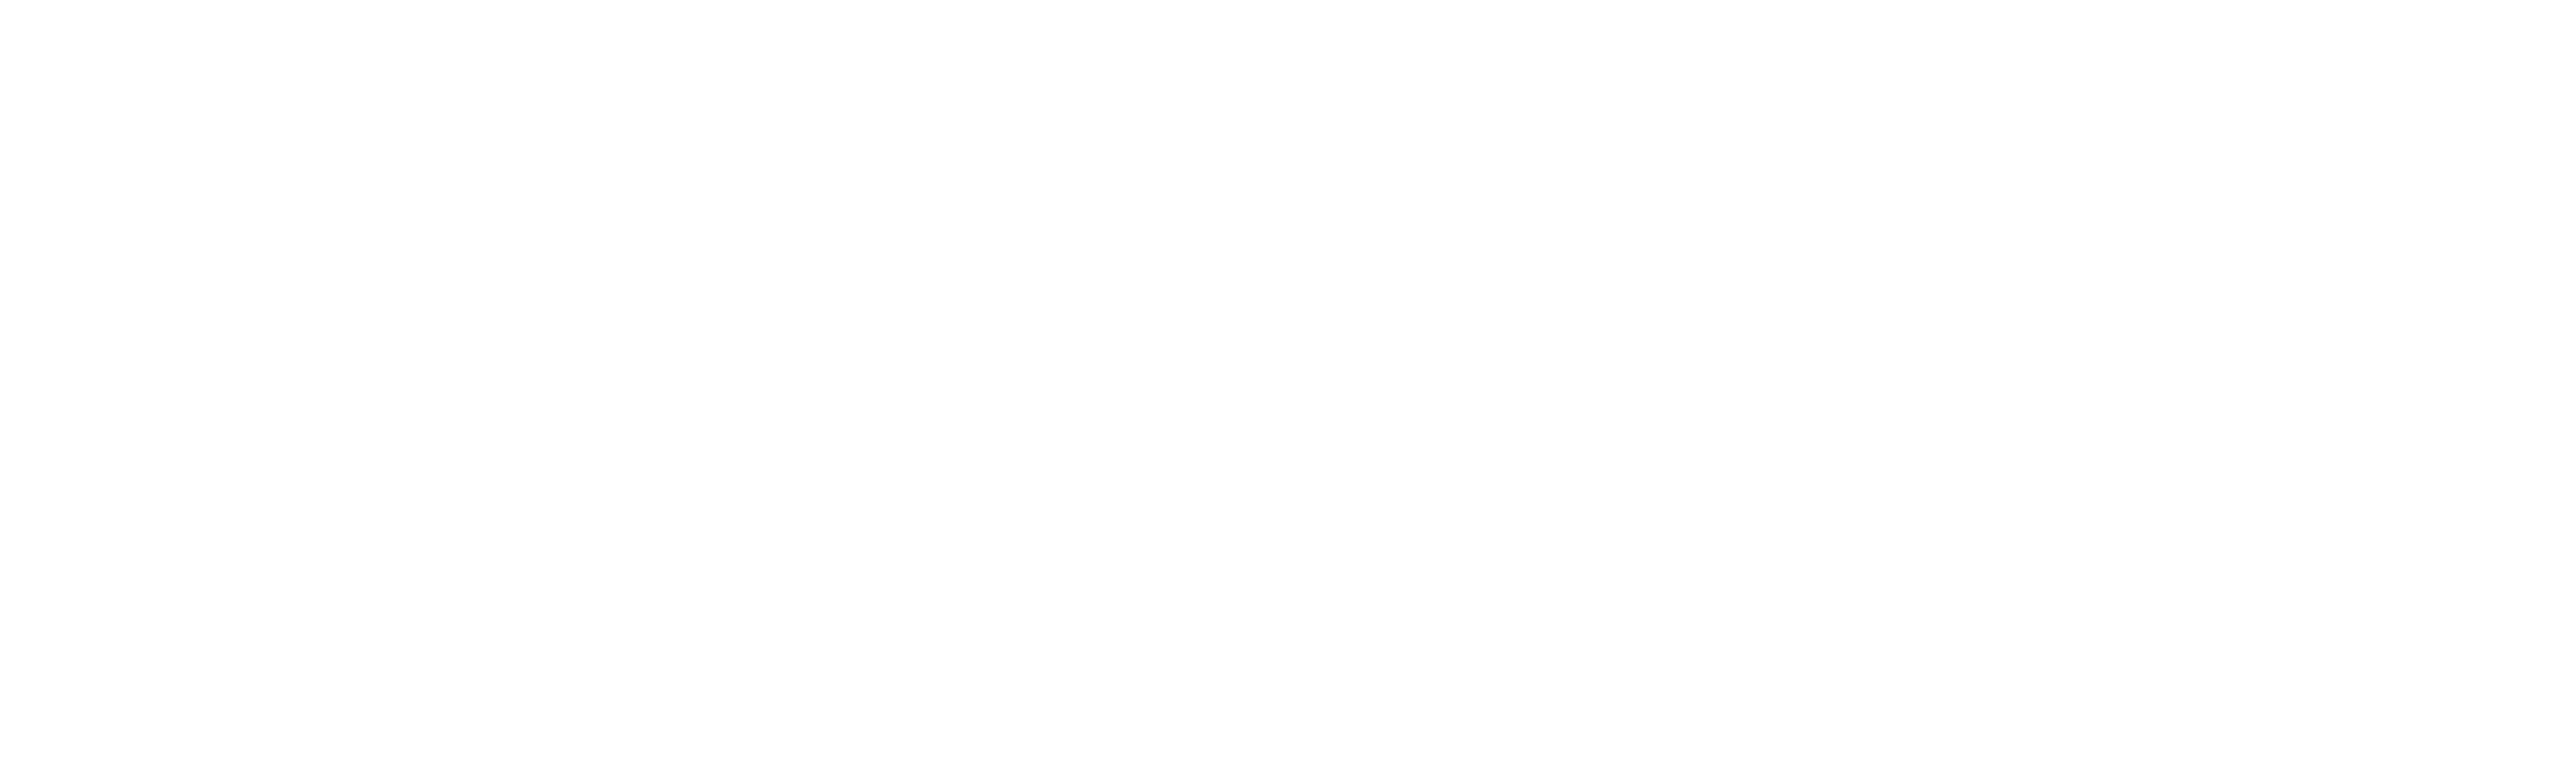 Hillsong: A Megachurch Exposed' Docuseries New Fourth Episode on TLC